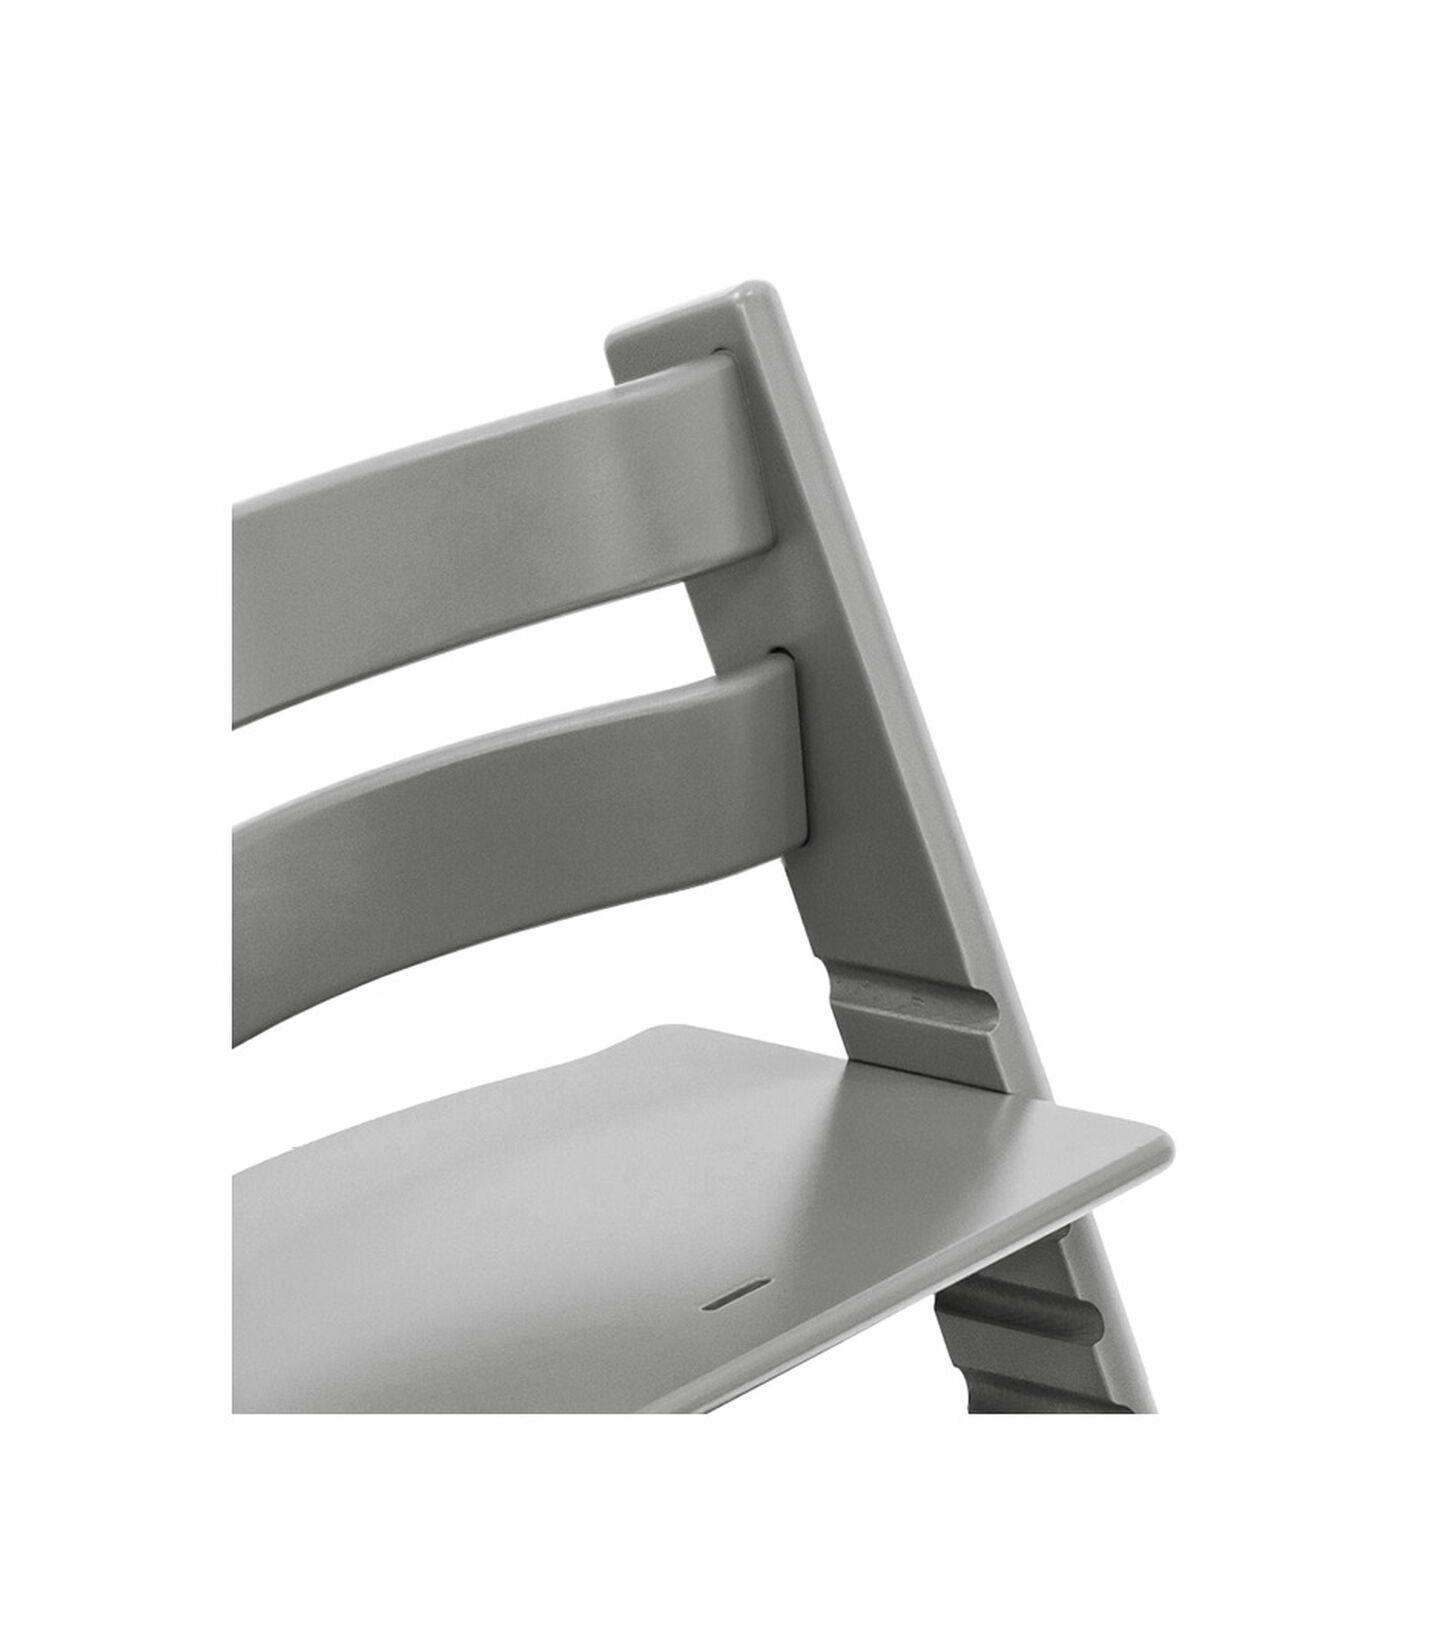 Tripp Trapp® Chair Storm Grey, Storm Grey, mainview view 3